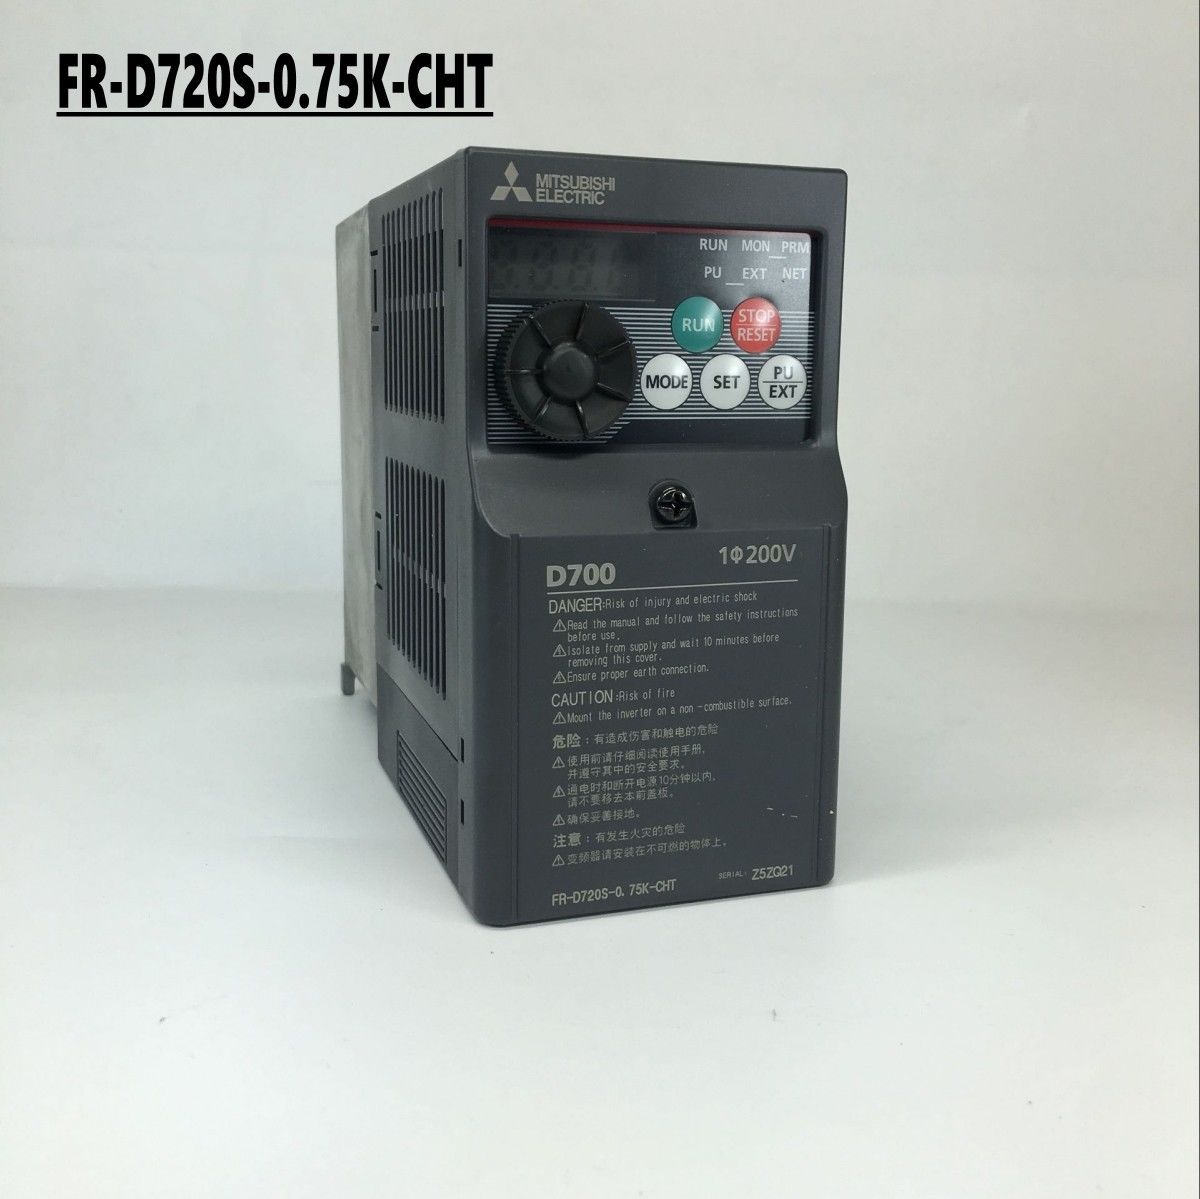 Brand New MITSUBISHI Inverter FR-D720S-0.75K-CHT IN BOX FR-D720S0.75KCHT - Click Image to Close